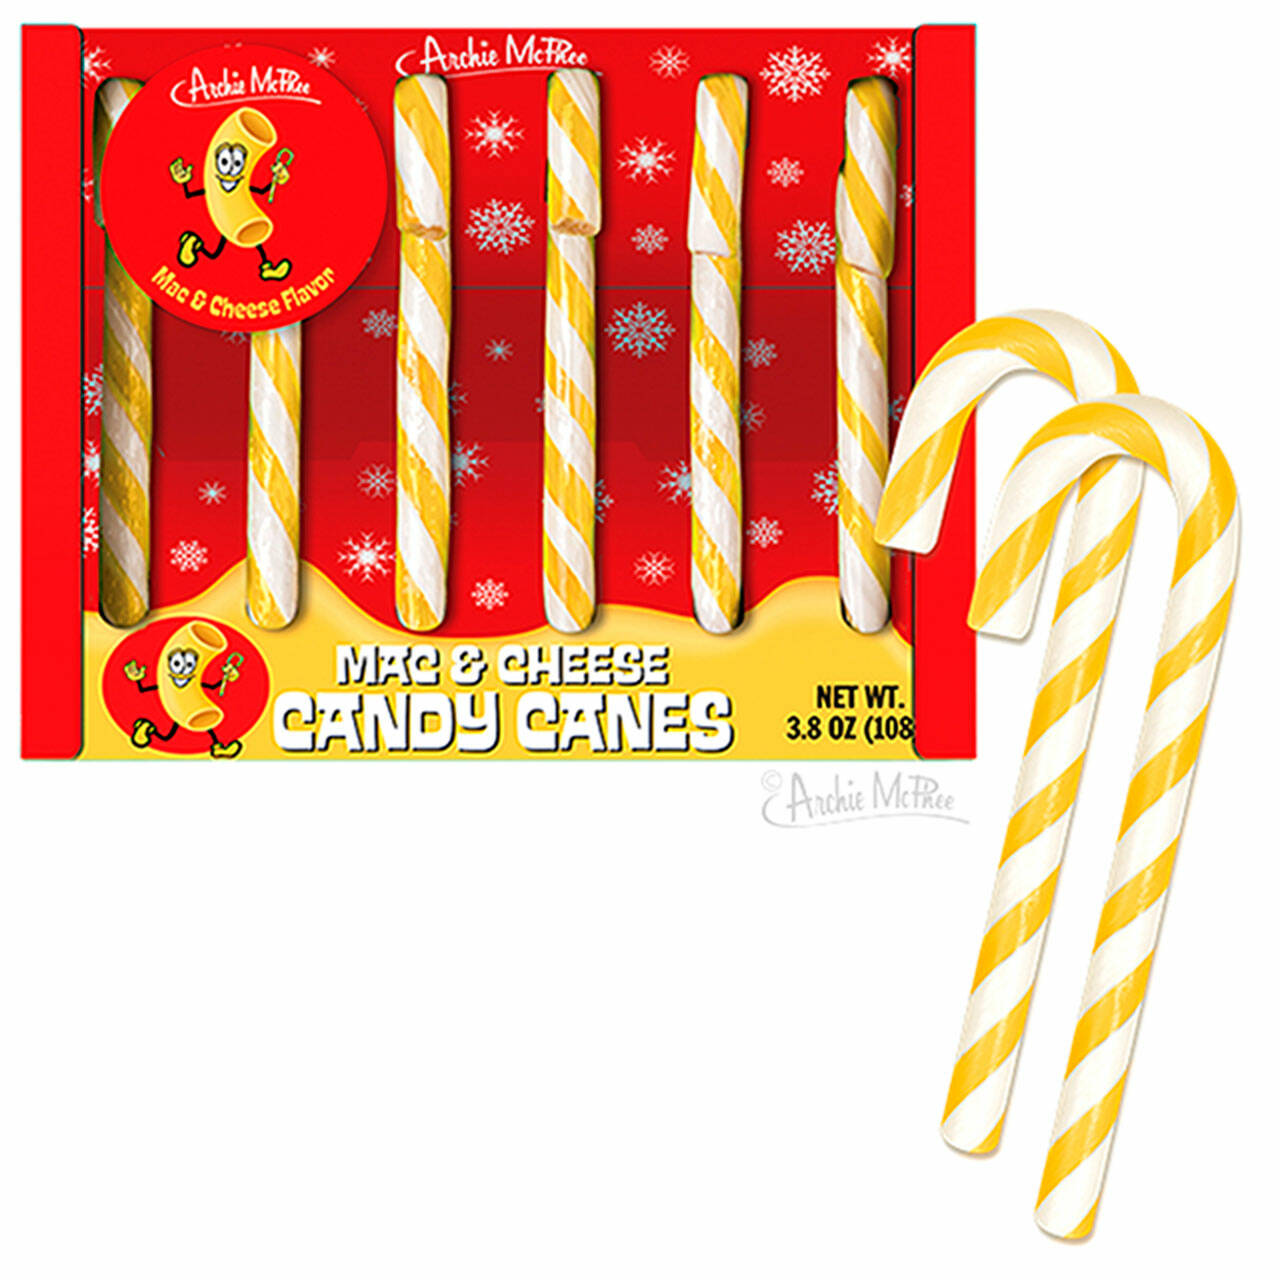 Seattle novelty company Archie McPhee sells mac and cheese candy canes, among other simulated flavours. (Archie McPhee)